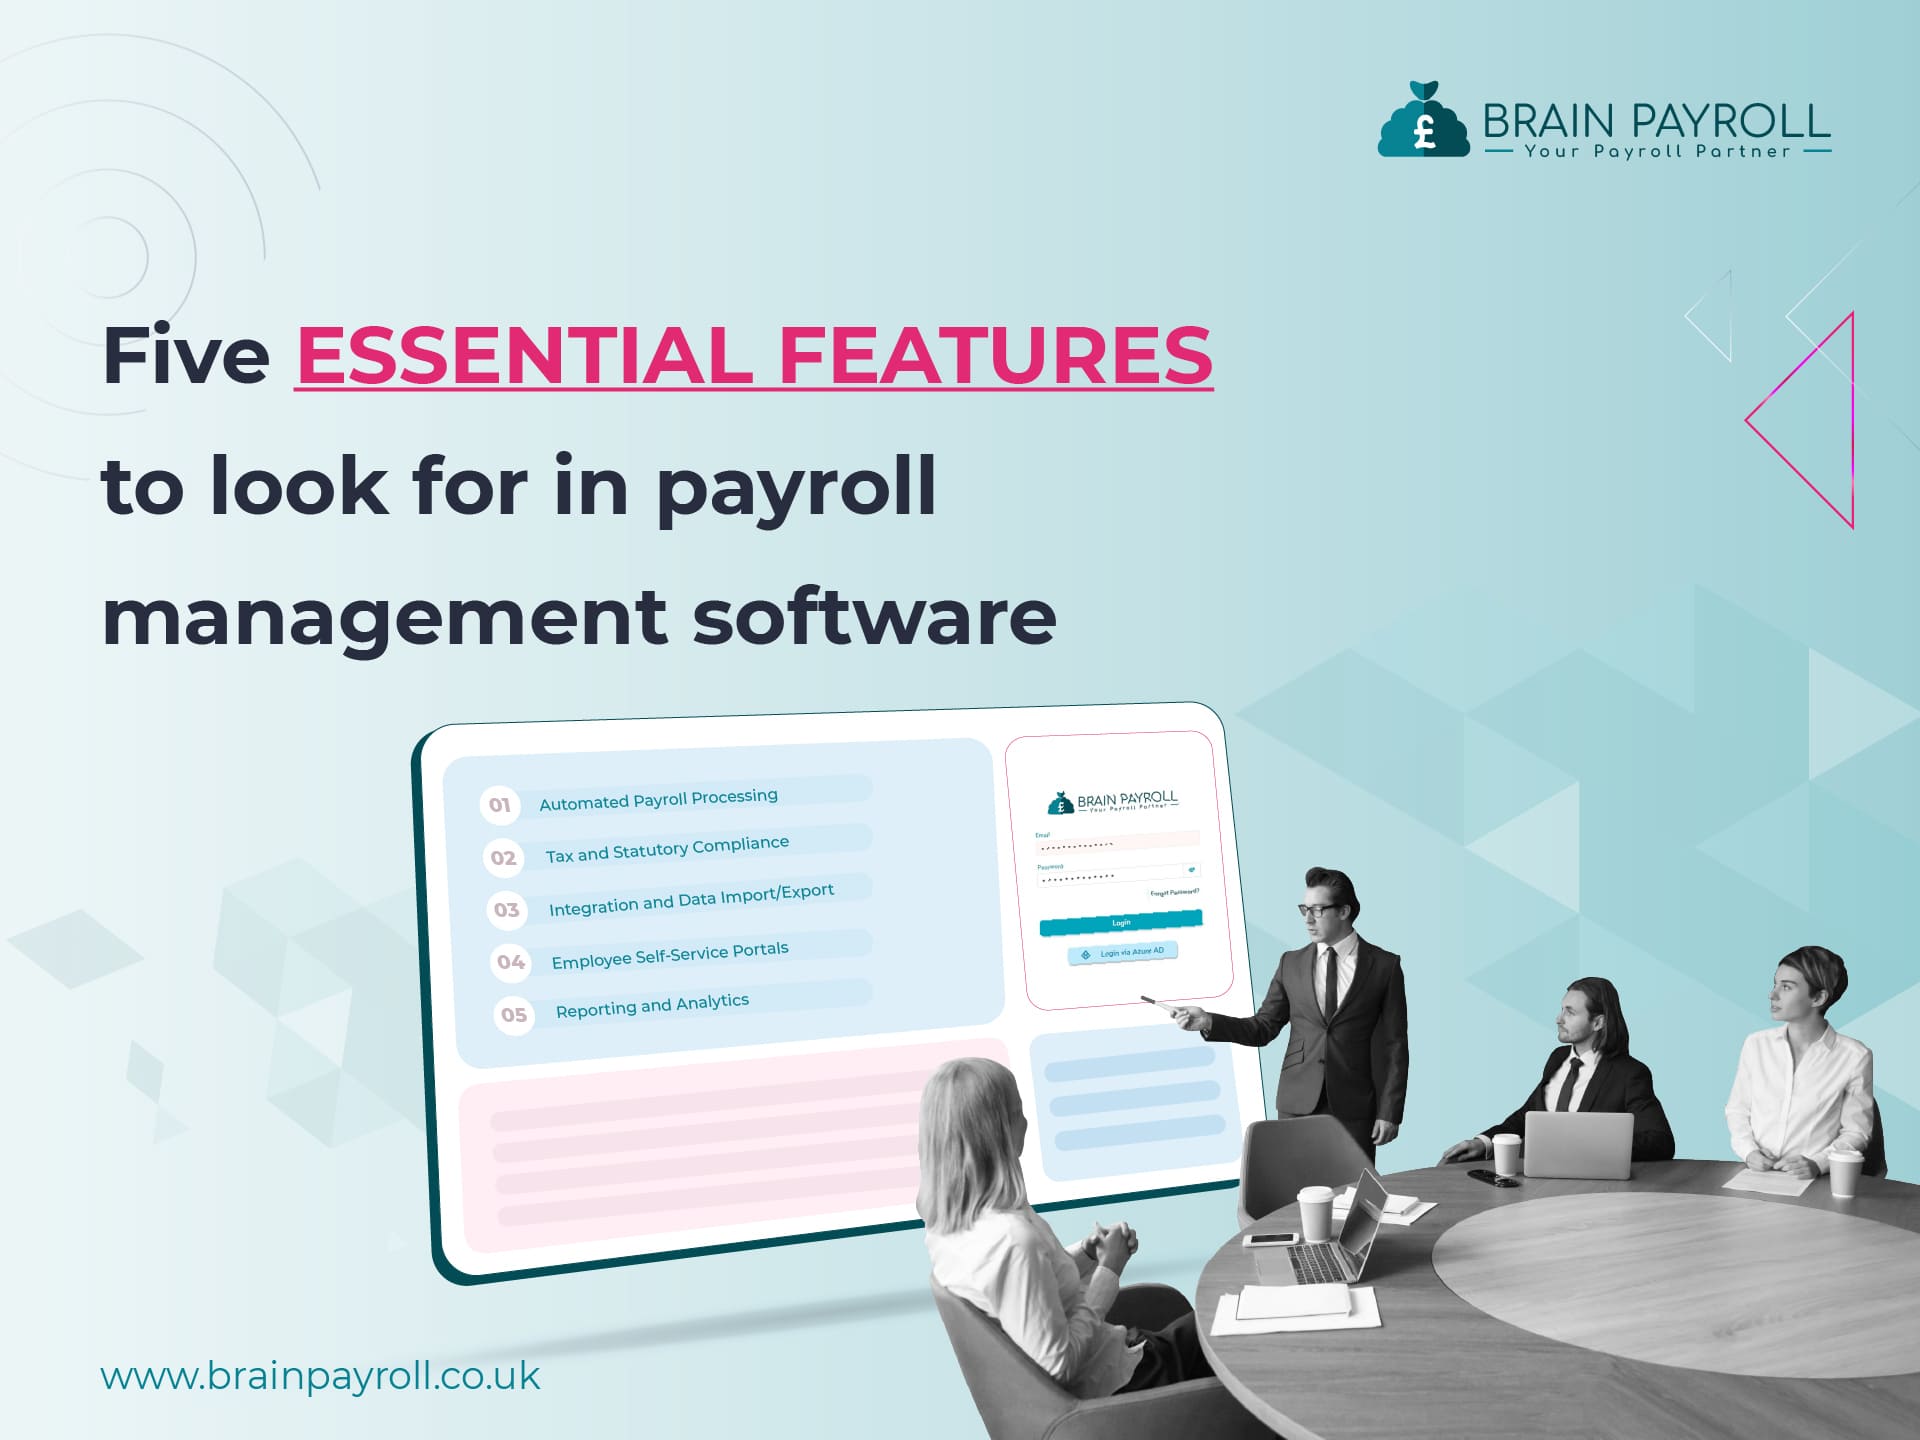 5 Essential Features to Look for in Payroll Management Software